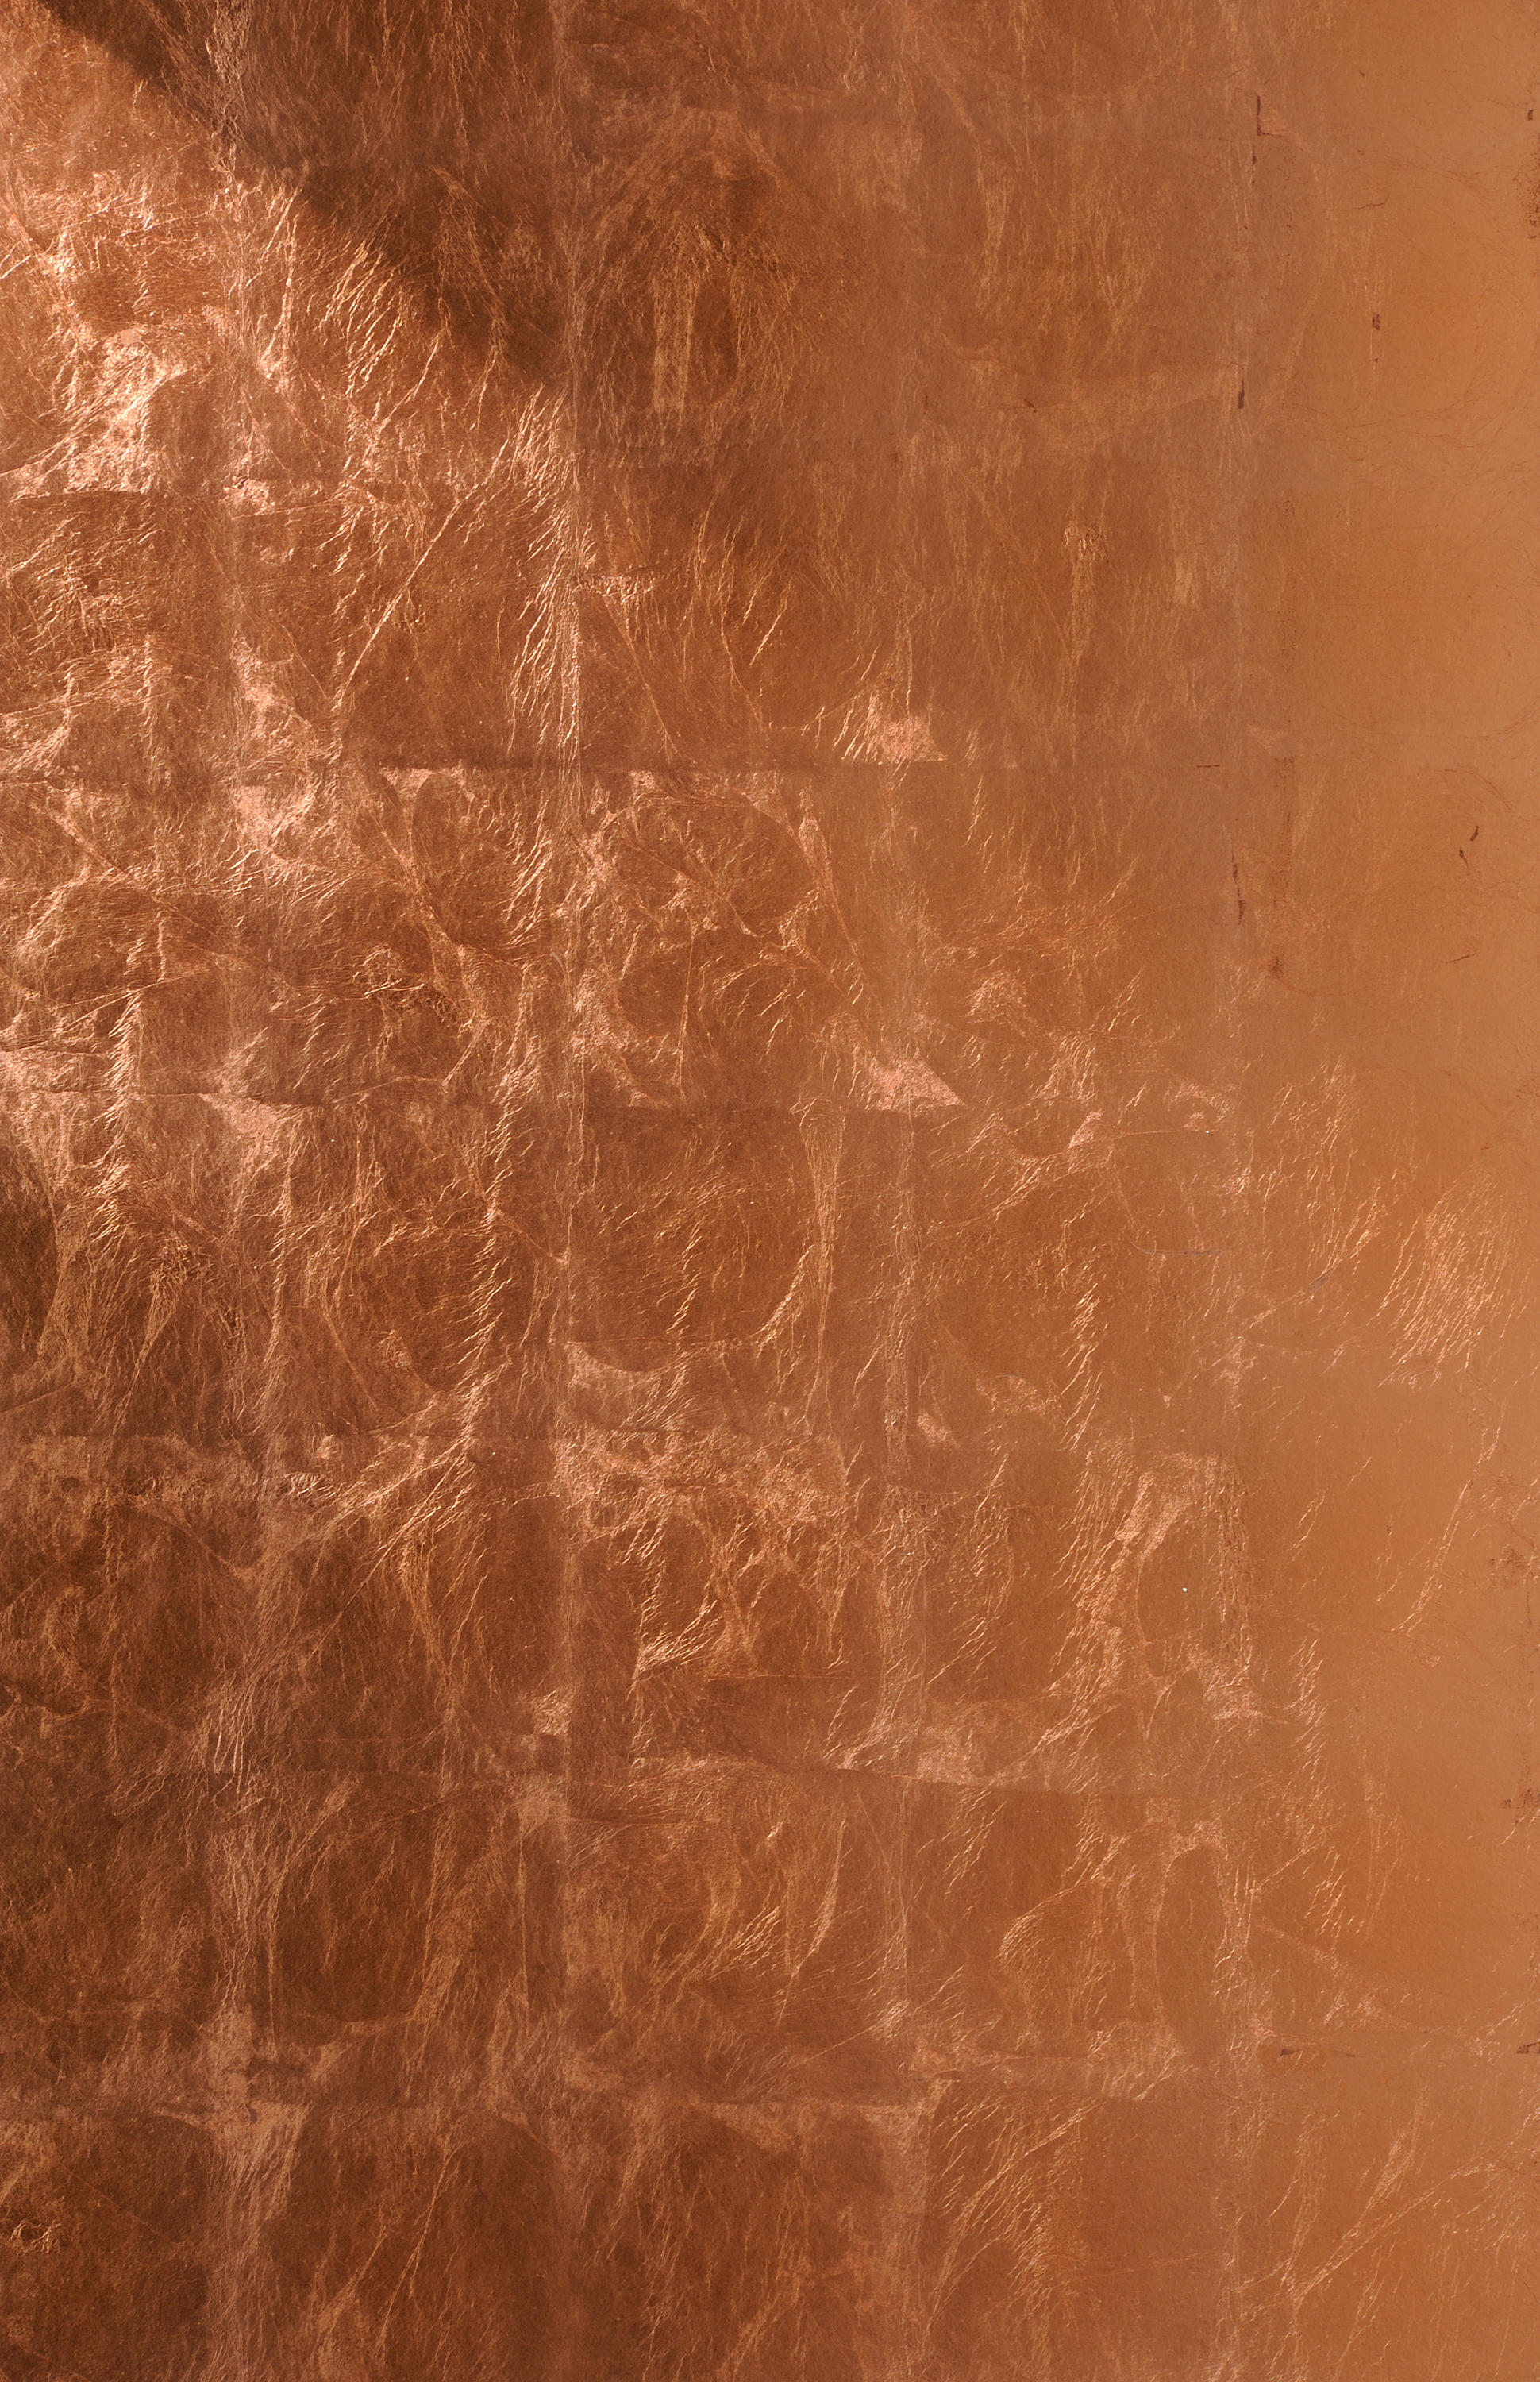 COPPER LEAF - Wall coverings / wallpapers from Agena | Architonic